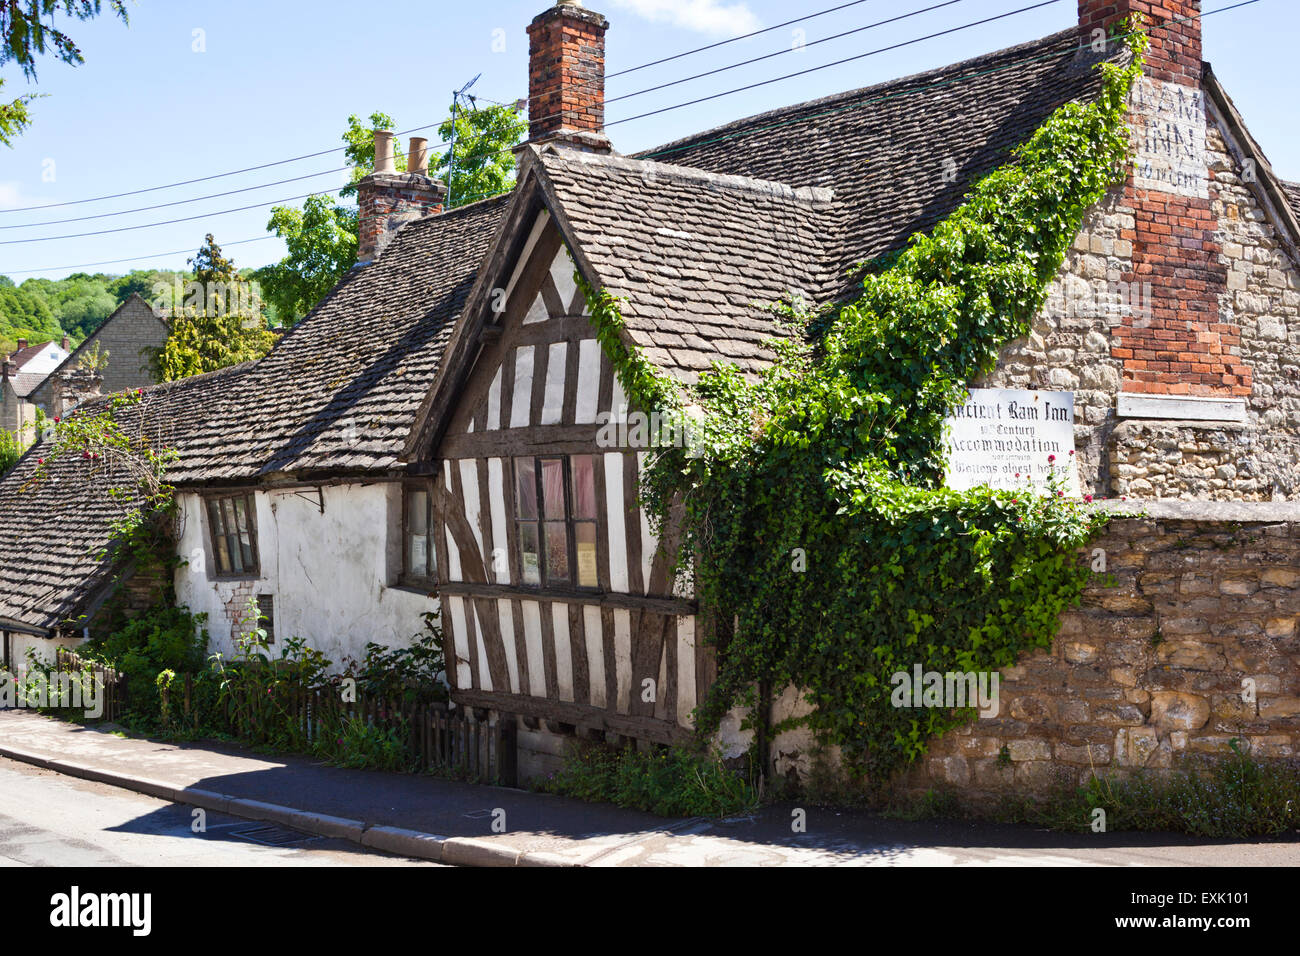 The ancient Ram Inn (a former pub) in the Cotswold town of Wotton under Edge, Gloucestershire UK Stock Photo